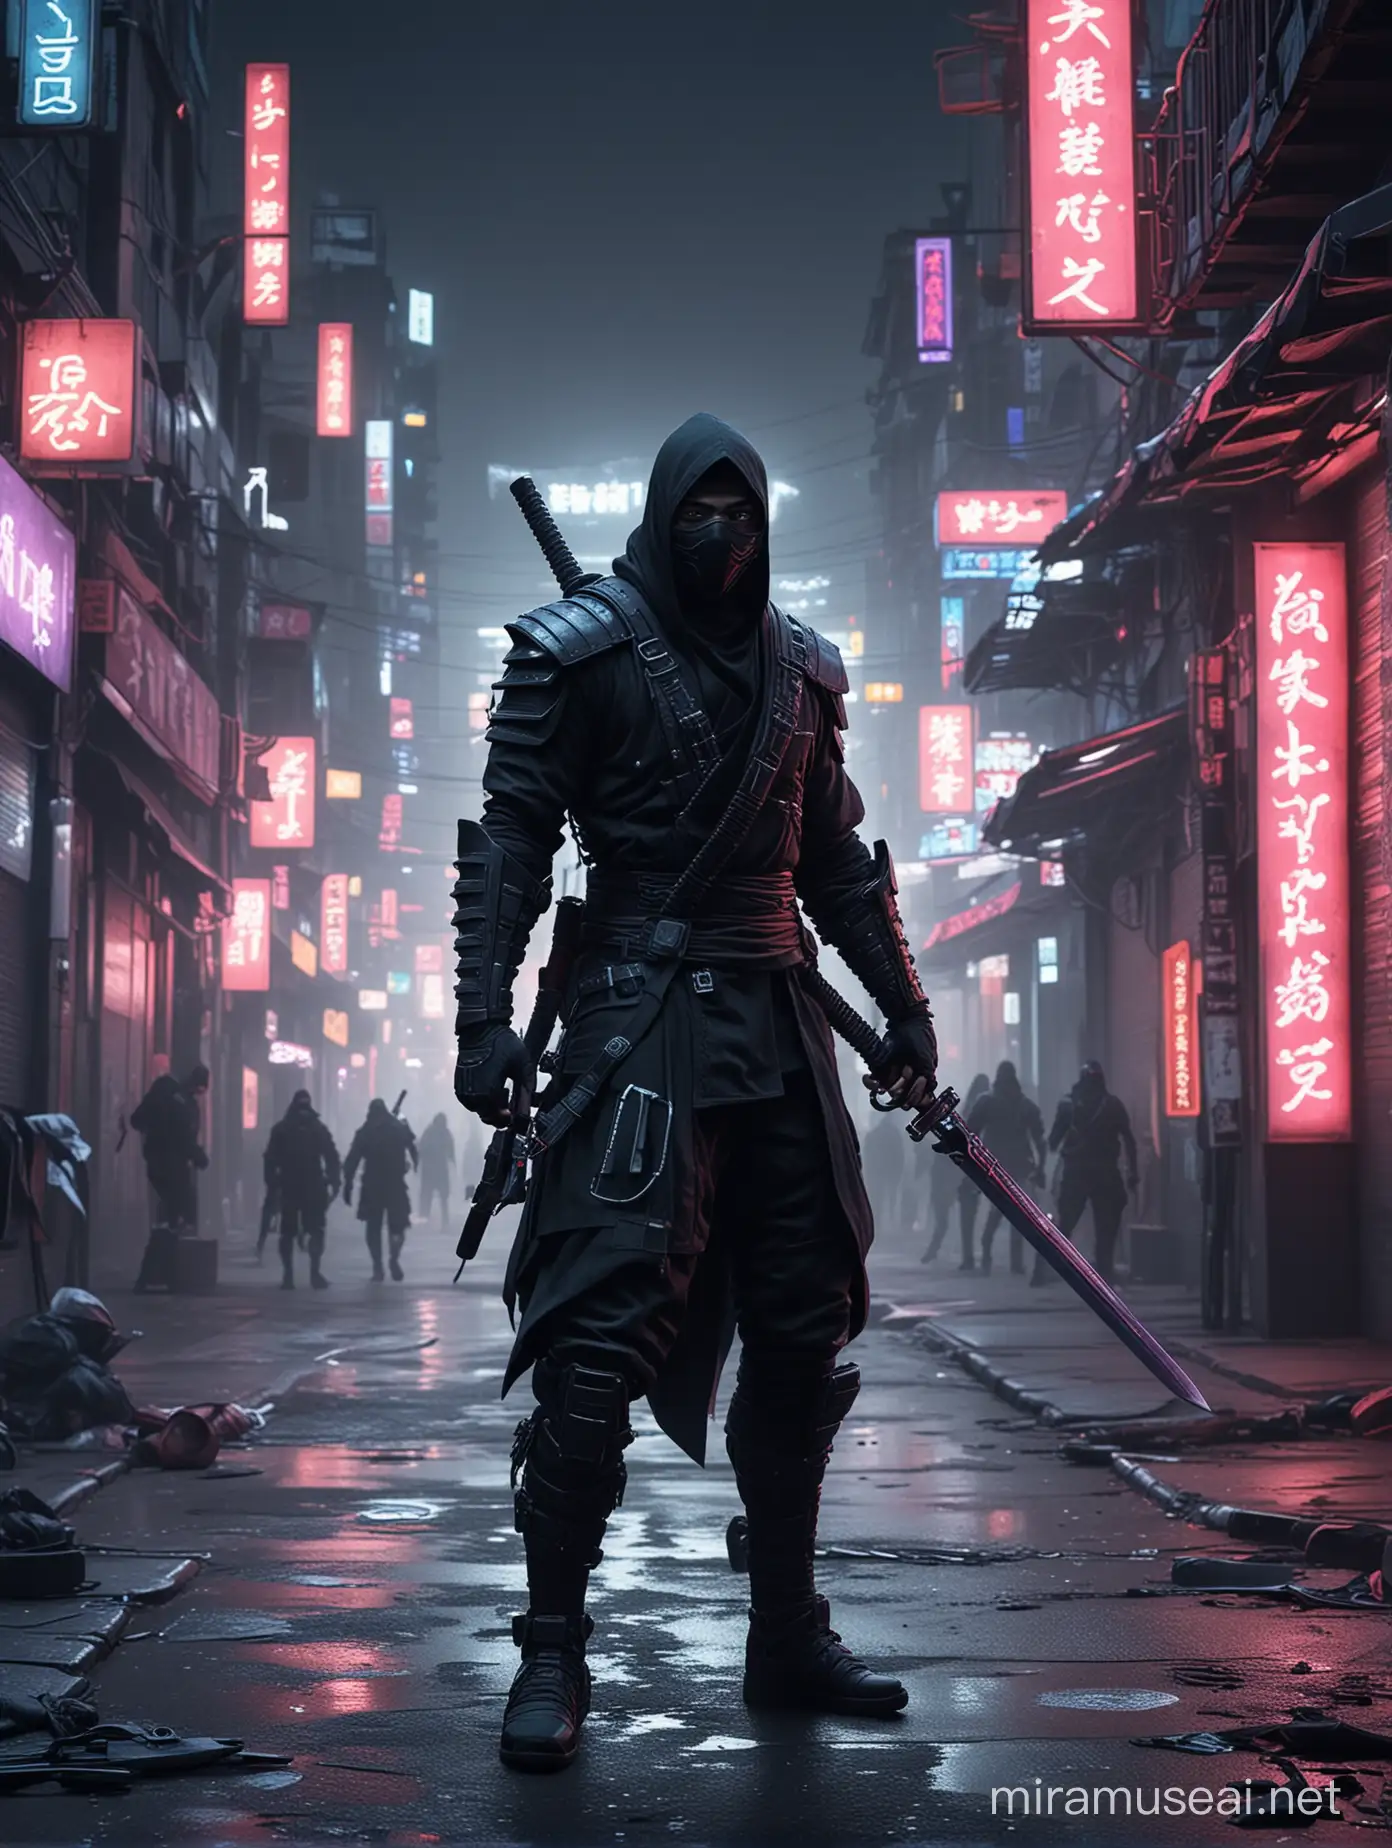 neon lights, unreal, sci-fi, street, fantasy, cyberpunk city,a ninja with mask and large sword, fighting in street 